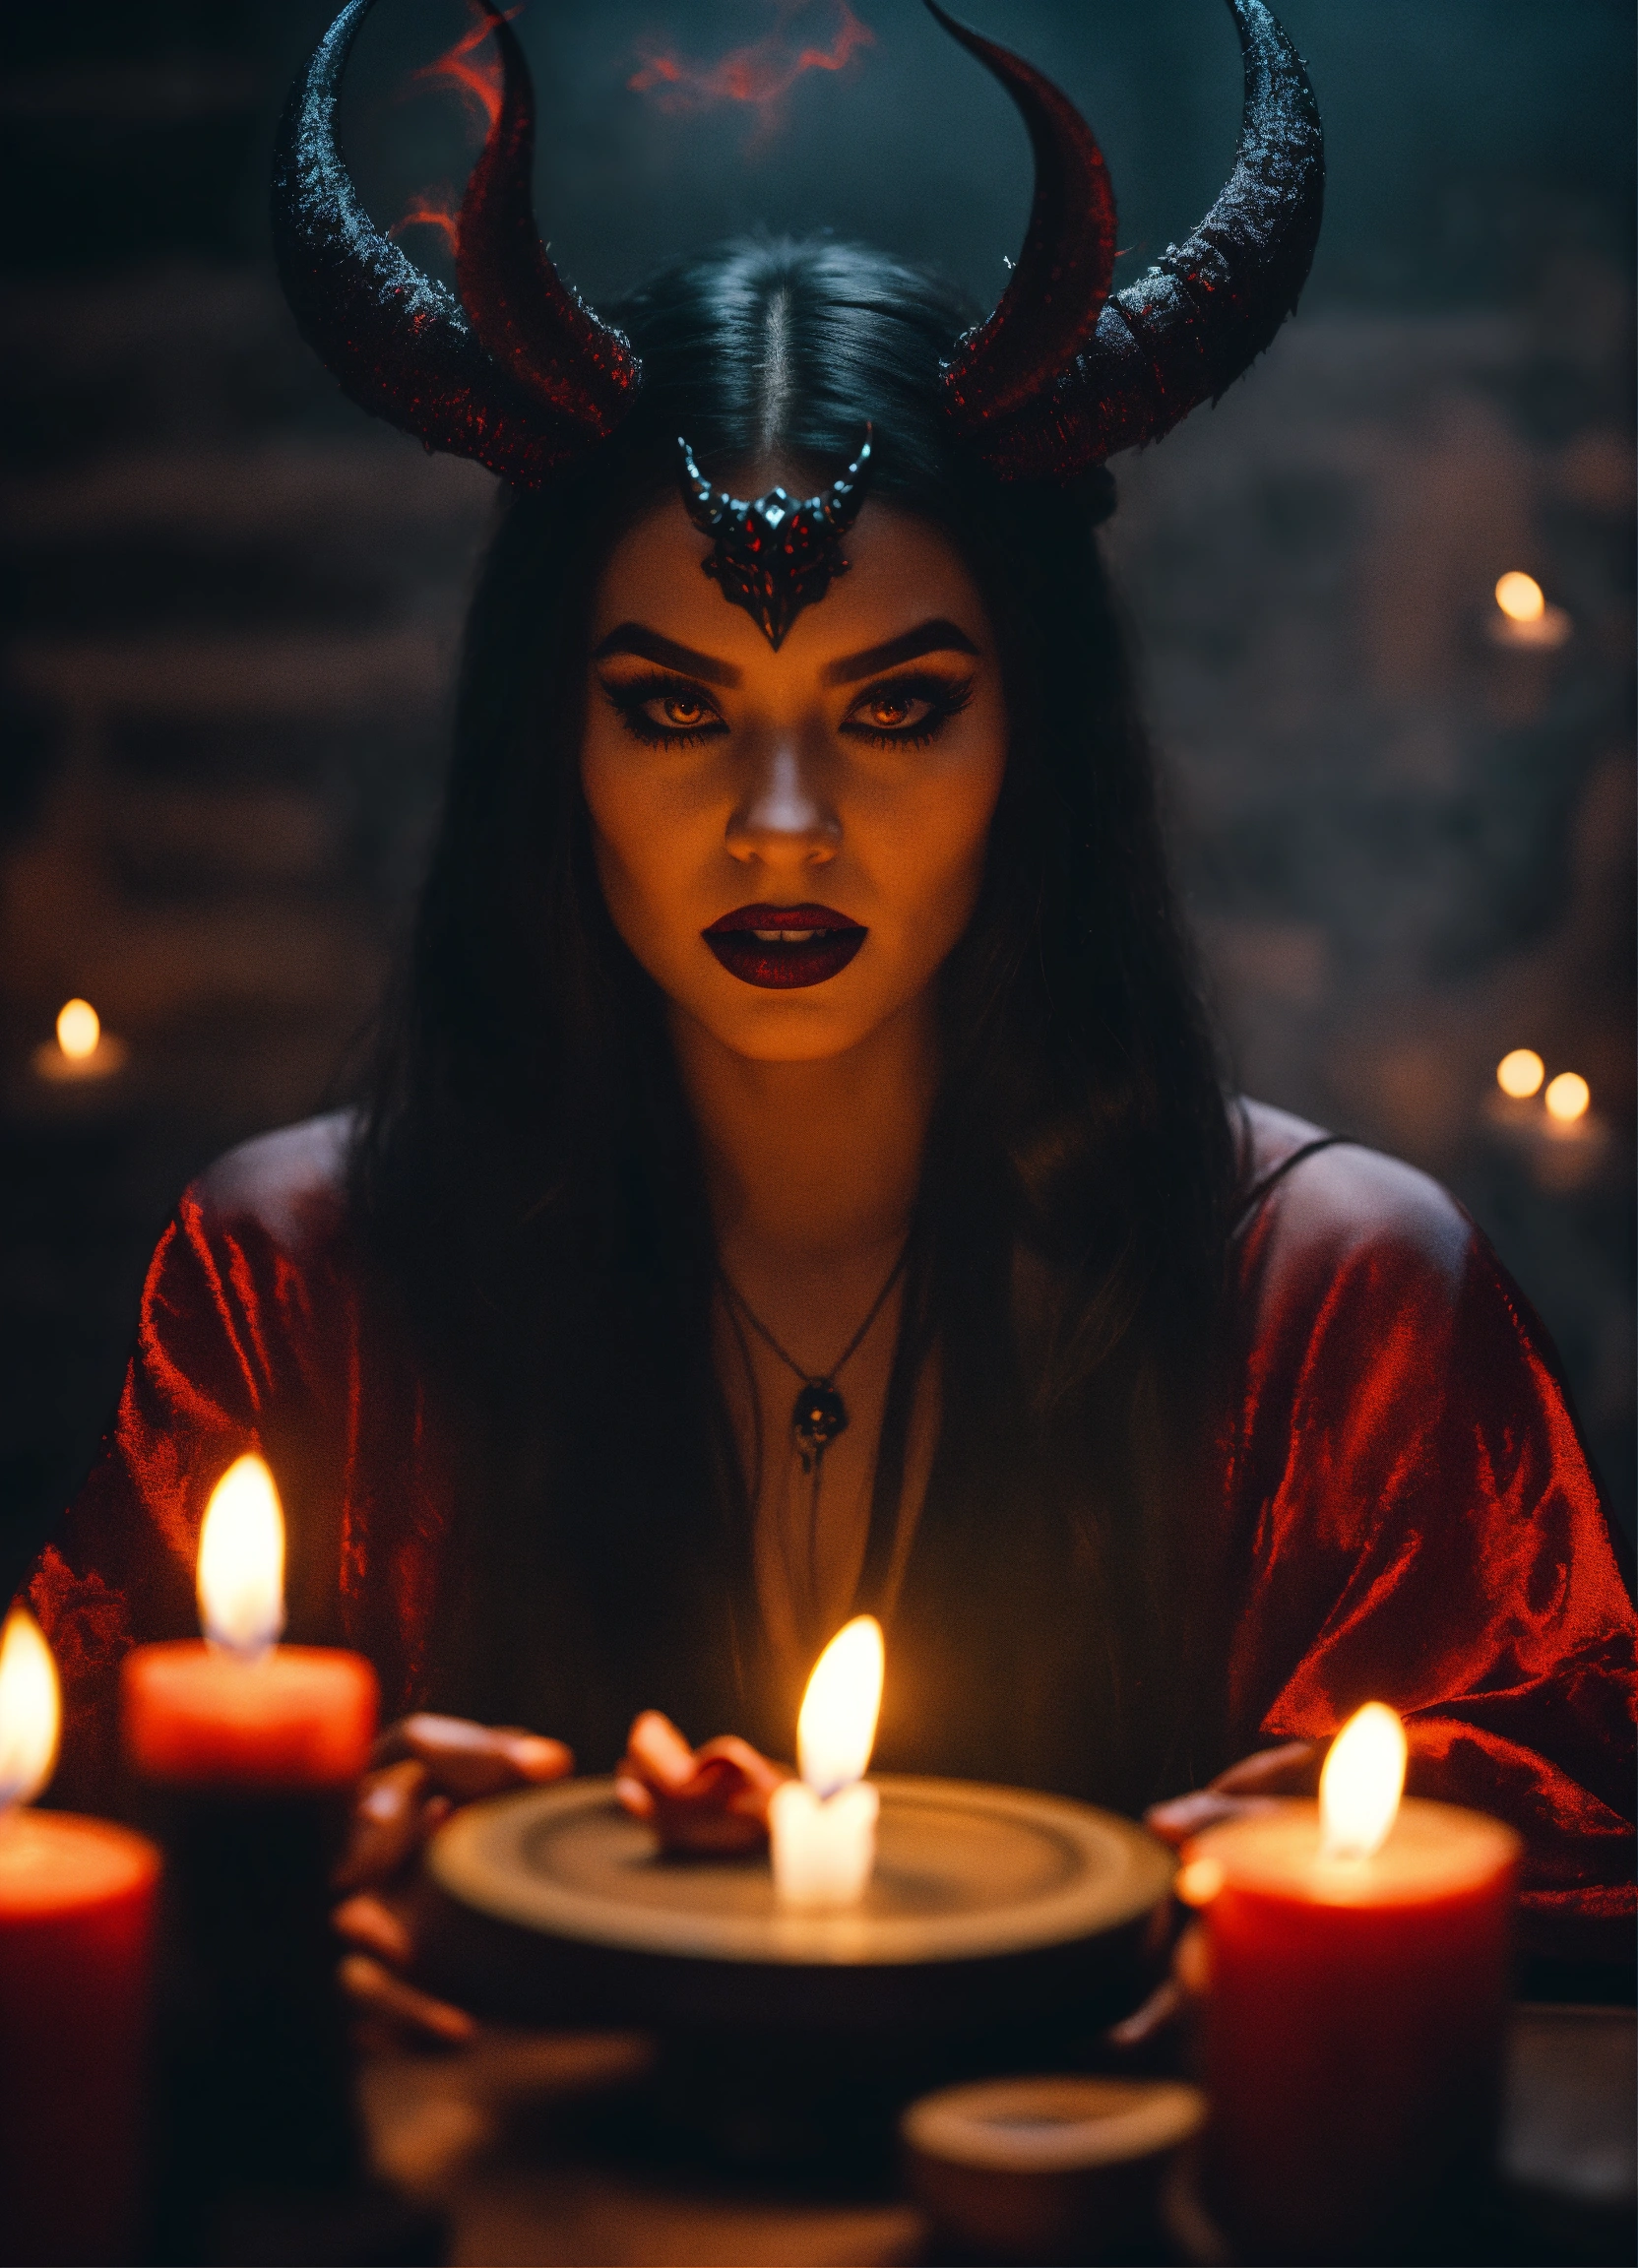 Lexica - Evil female demon teaching women about magic, scary vibes